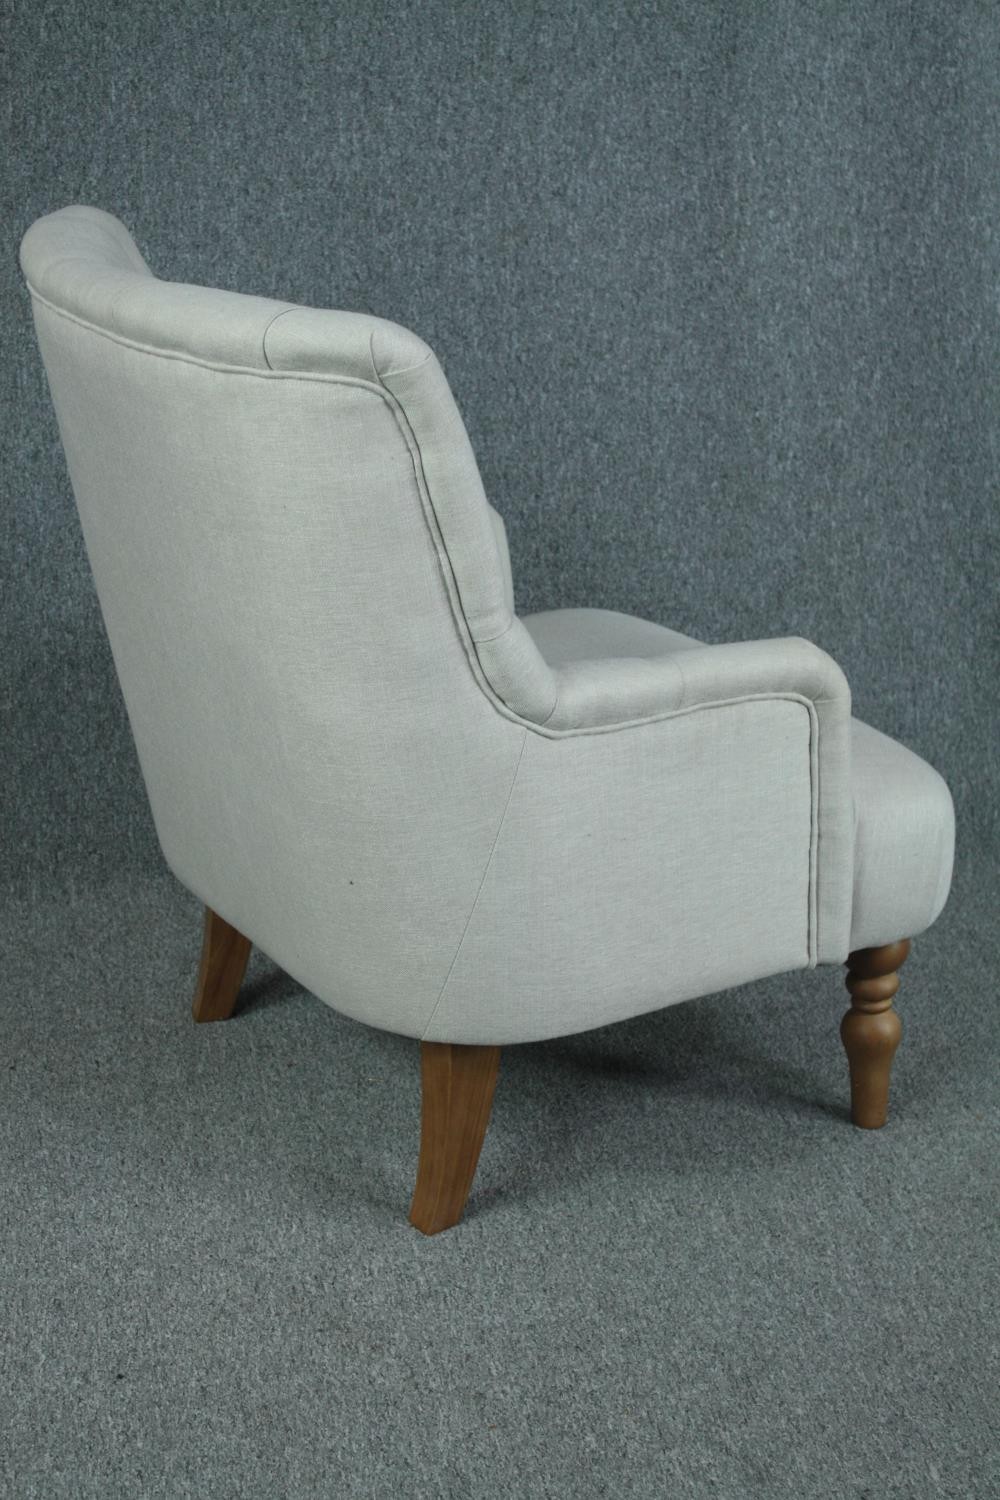 Armchair, contemporary upholstered in 19th century style. - Image 3 of 4